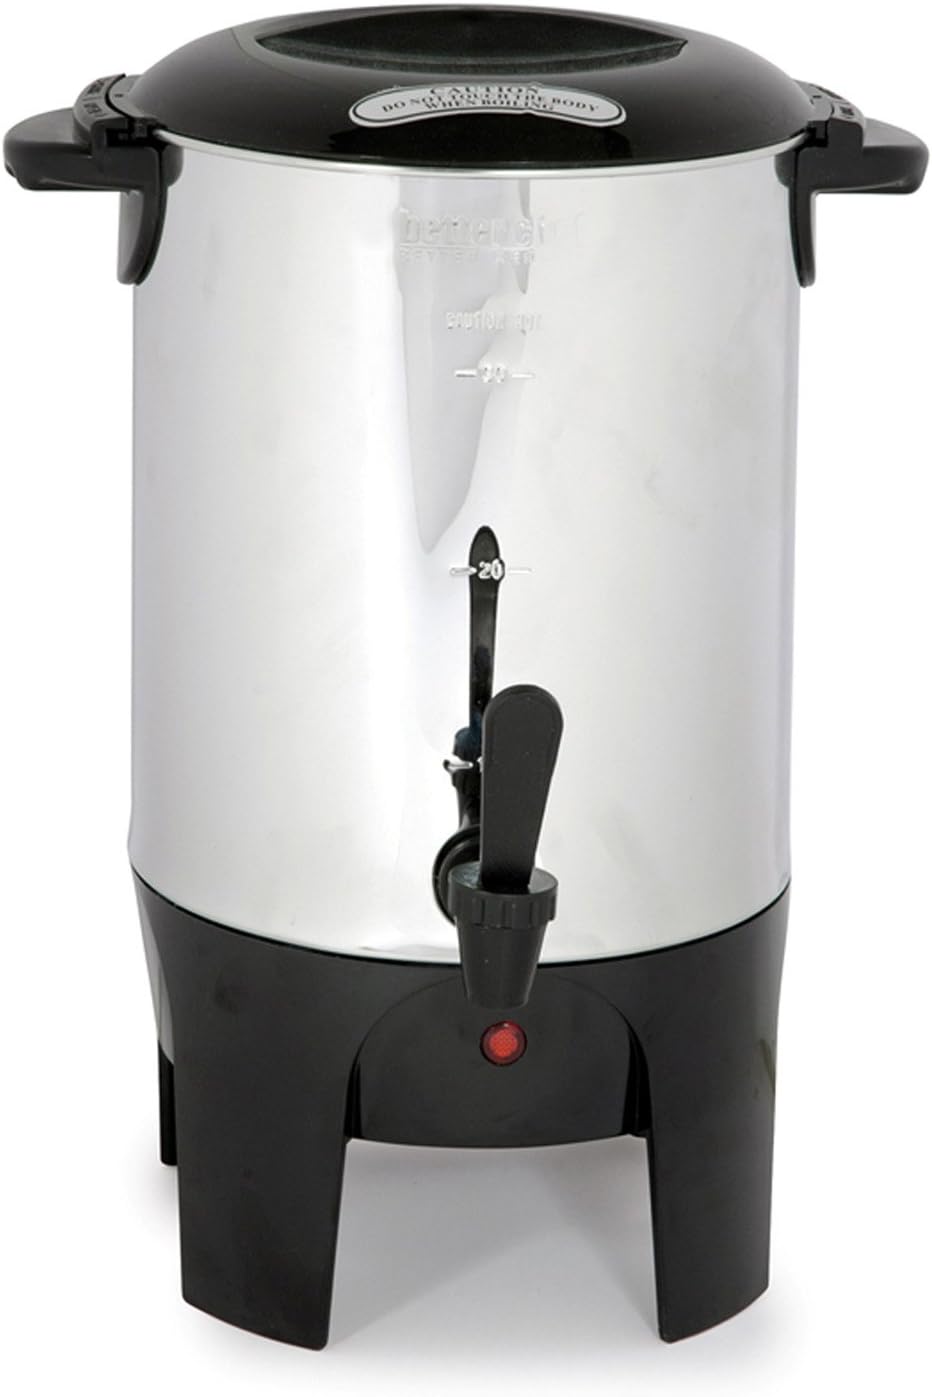 Better Chef 10-30 Cup Coffeemaker Review